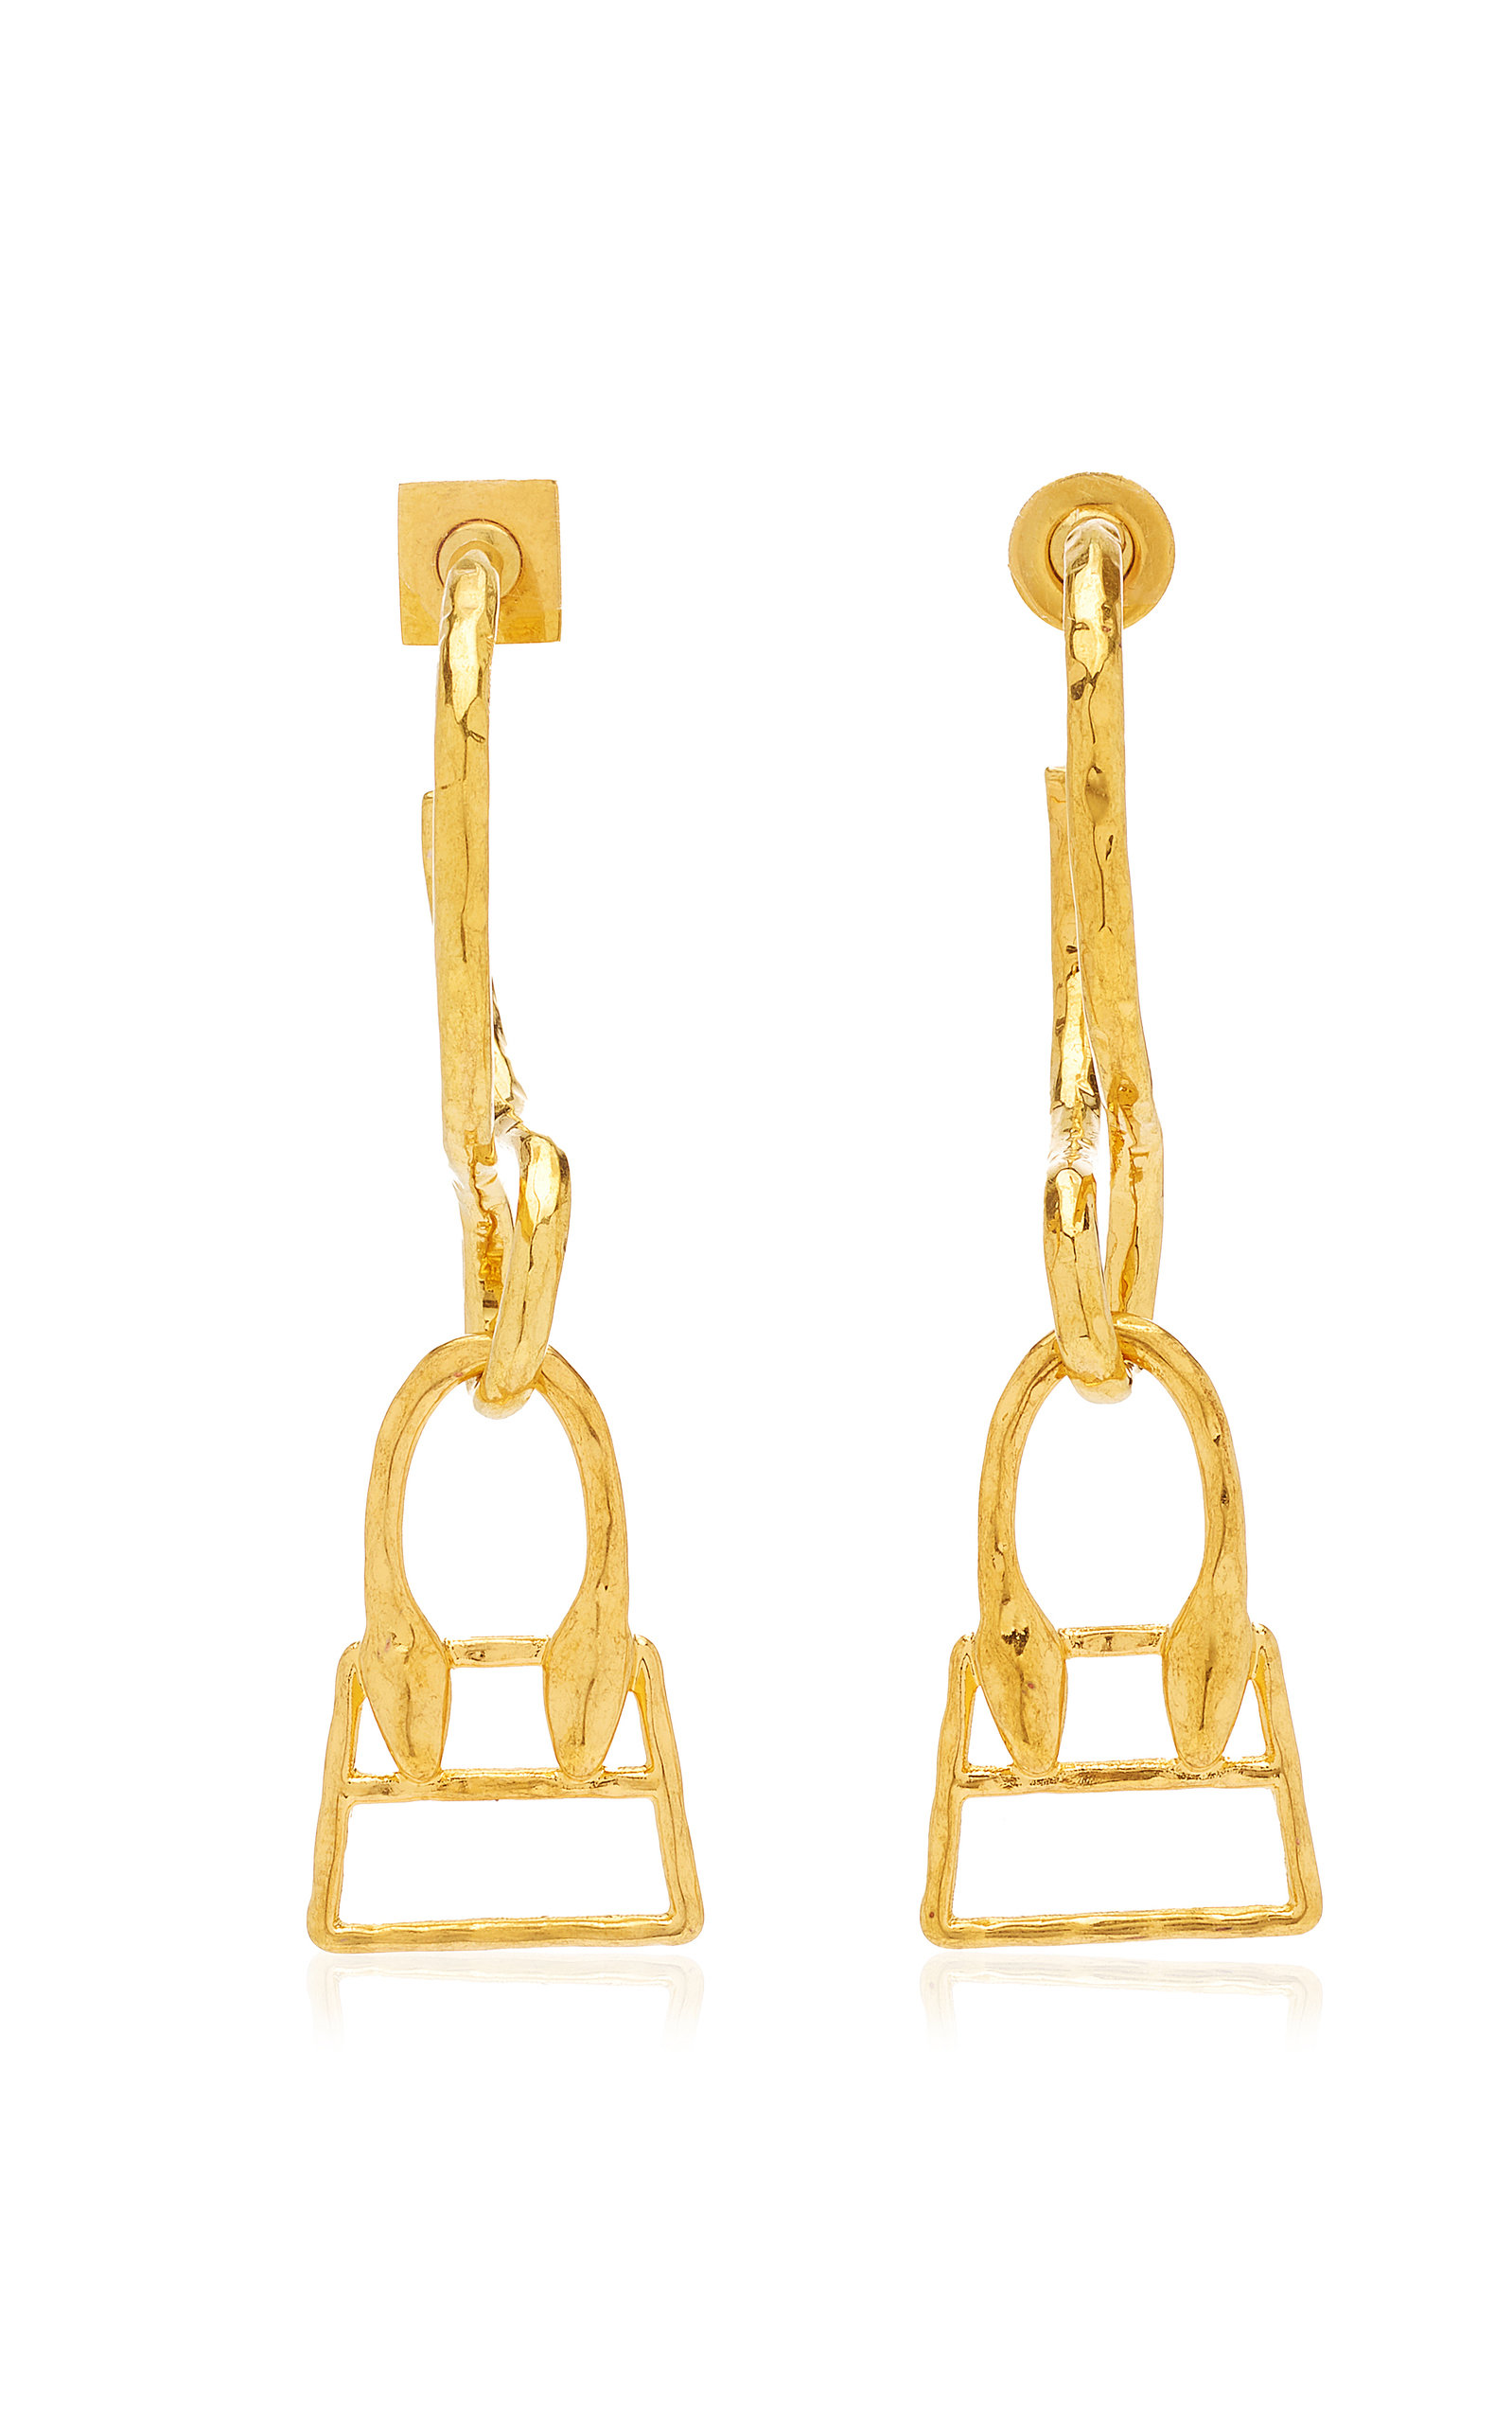 Jacquemus - Women's Les Creoles Chiquito Gold-Plated Earrings - Gold - Moda Operandi - Gifts For Her